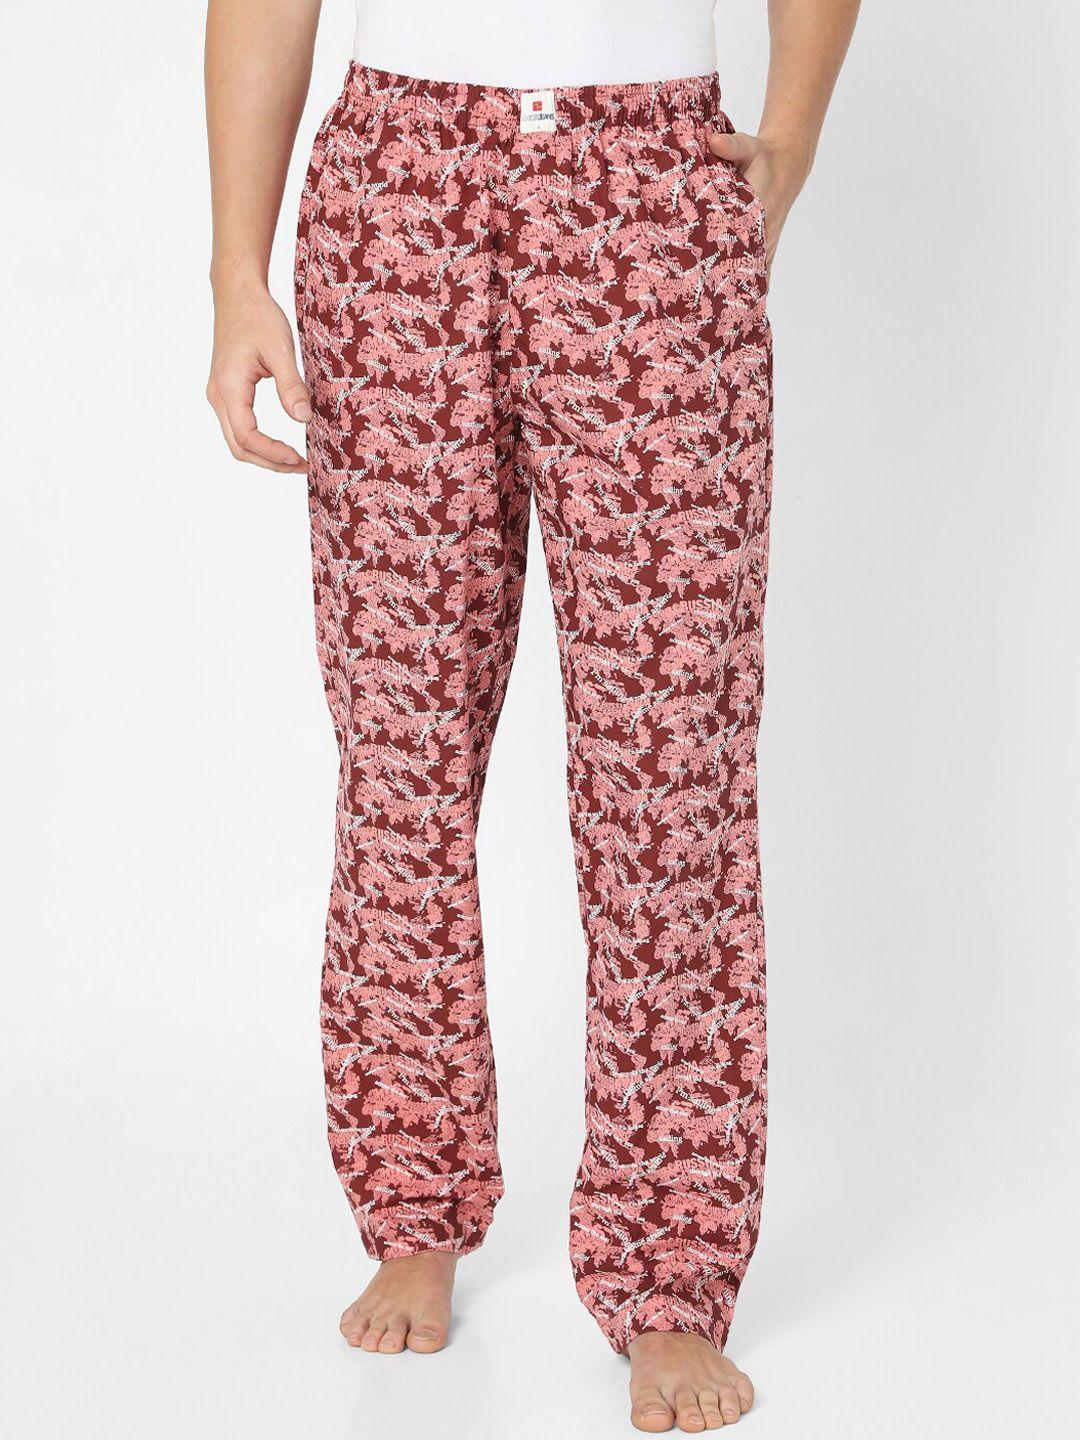 underjeans by spykar men red printed cotton lounge pants